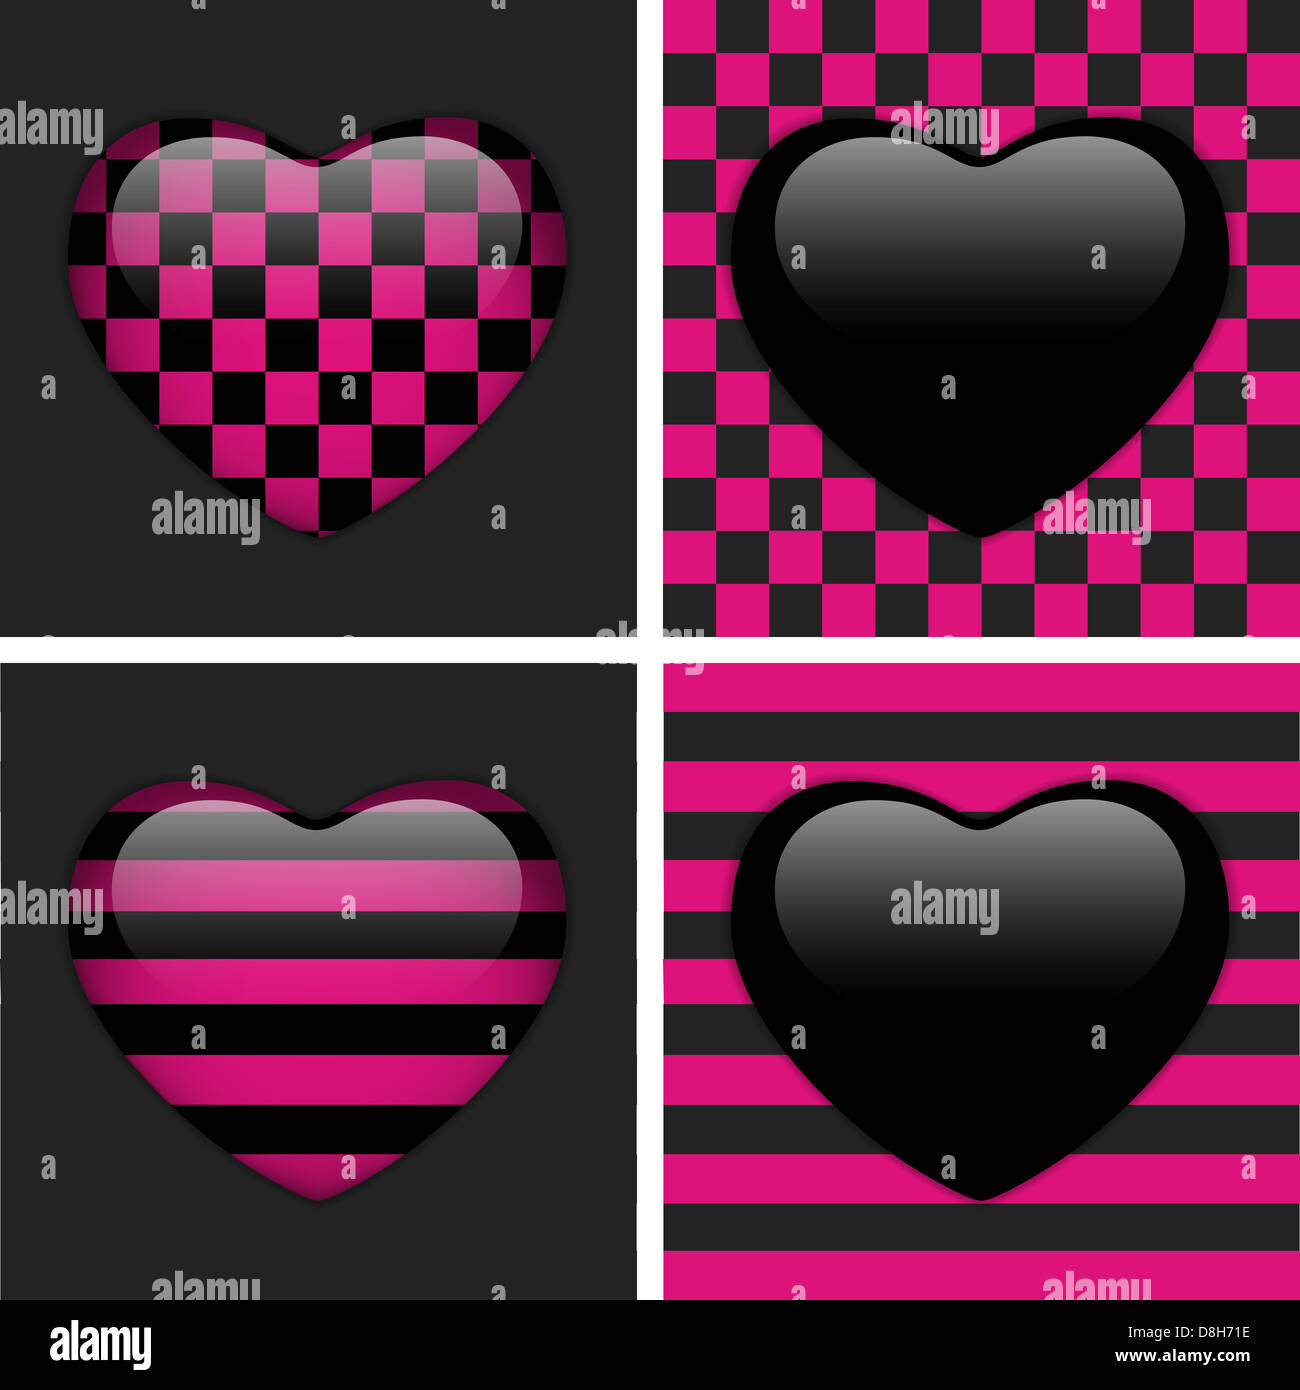 vector - Set of Four Glossy Emo Hearts. Pink and Black Chess and Stripes Stock Photo